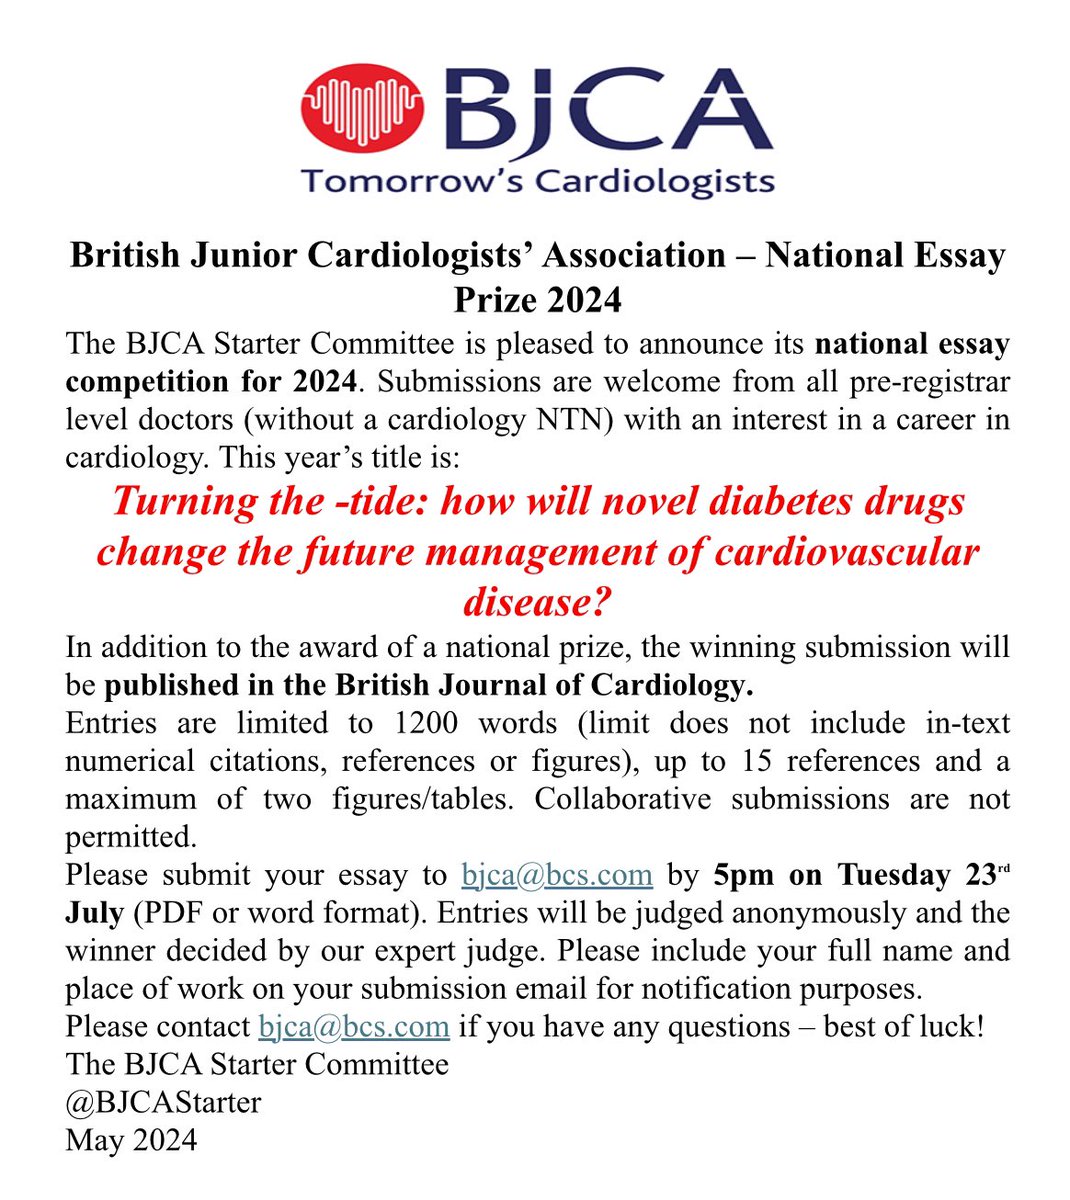 🚨🚨 Essay Competition Announcement 🚨🚨 For all BJCA starter members - see below for details! Winner gets national prize and publication in @BrJCardiol ! Closing date Tuesday 23rd July at 5pm, good luck all!